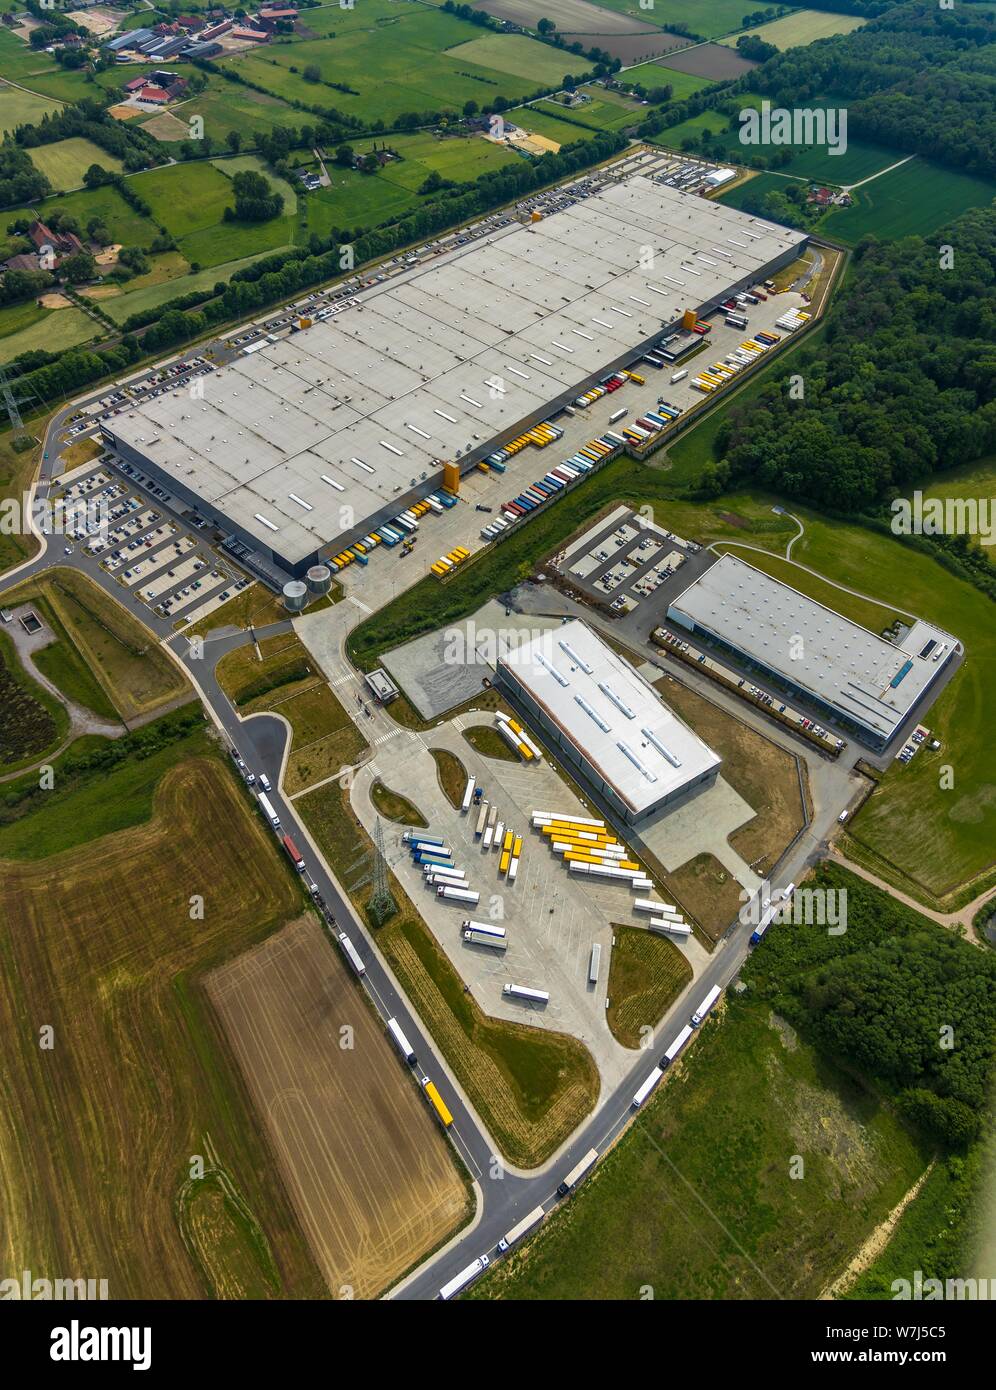 Aerial view, truck parking at the logistics centre Amazon Logistik Werne GmbH, Werne, Ruhr area, North Rhine-Westphalia, Germany Stock Photo